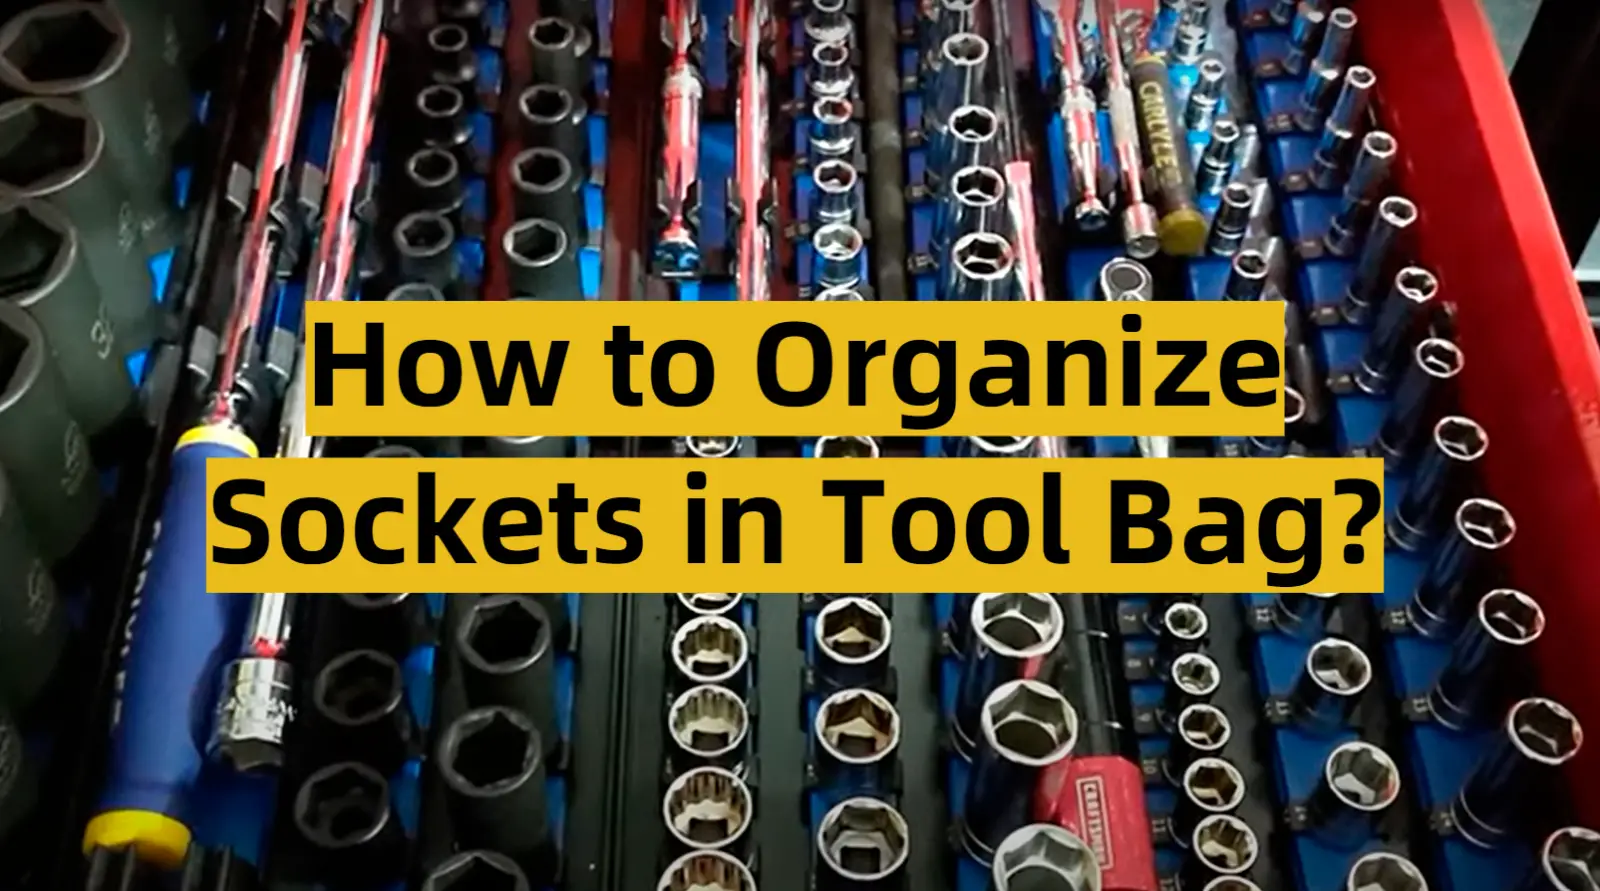 How to Organize Sockets in Tool Bag?